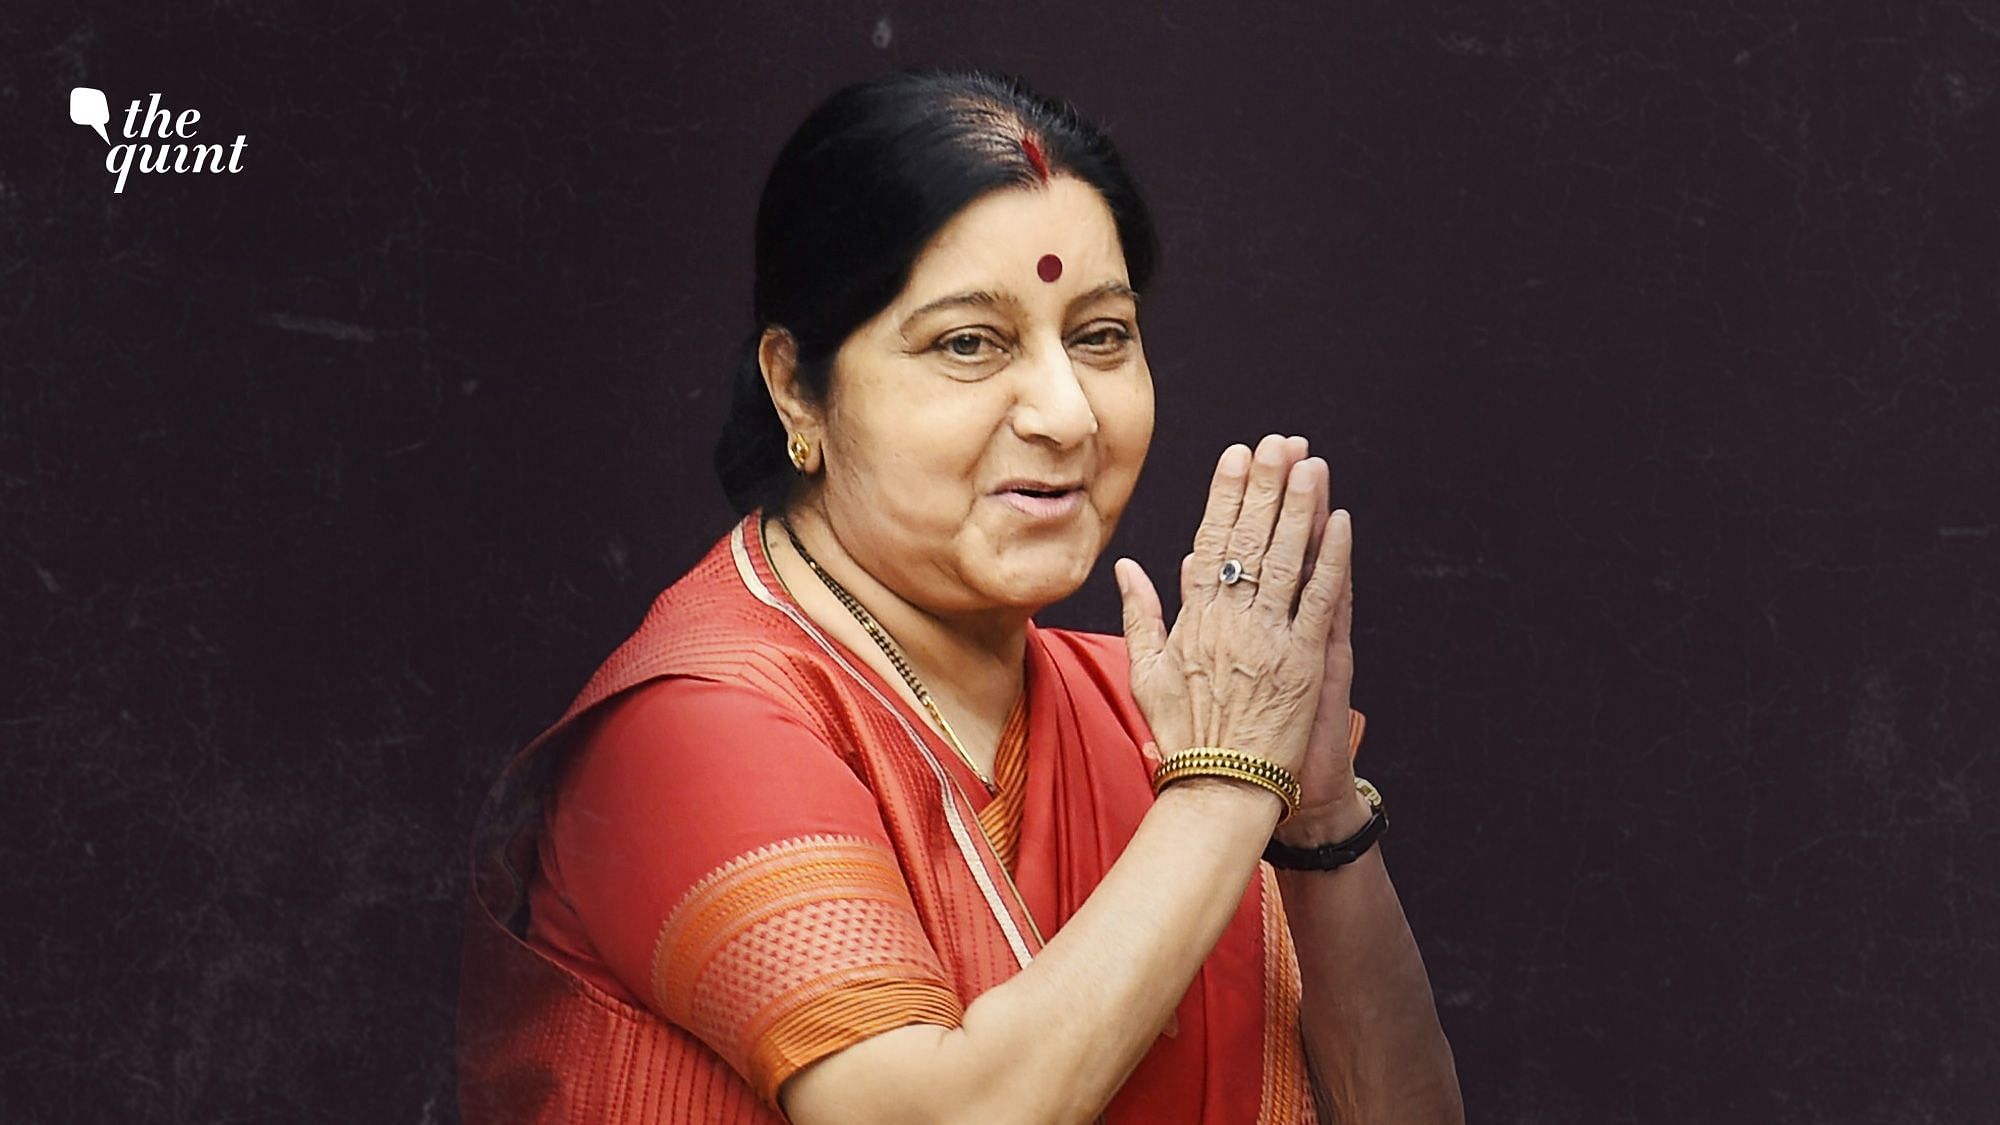 Former External Affairs Minister Sushma Swaraj passed away at the age of 67 after suffering from a cardiac arrest.